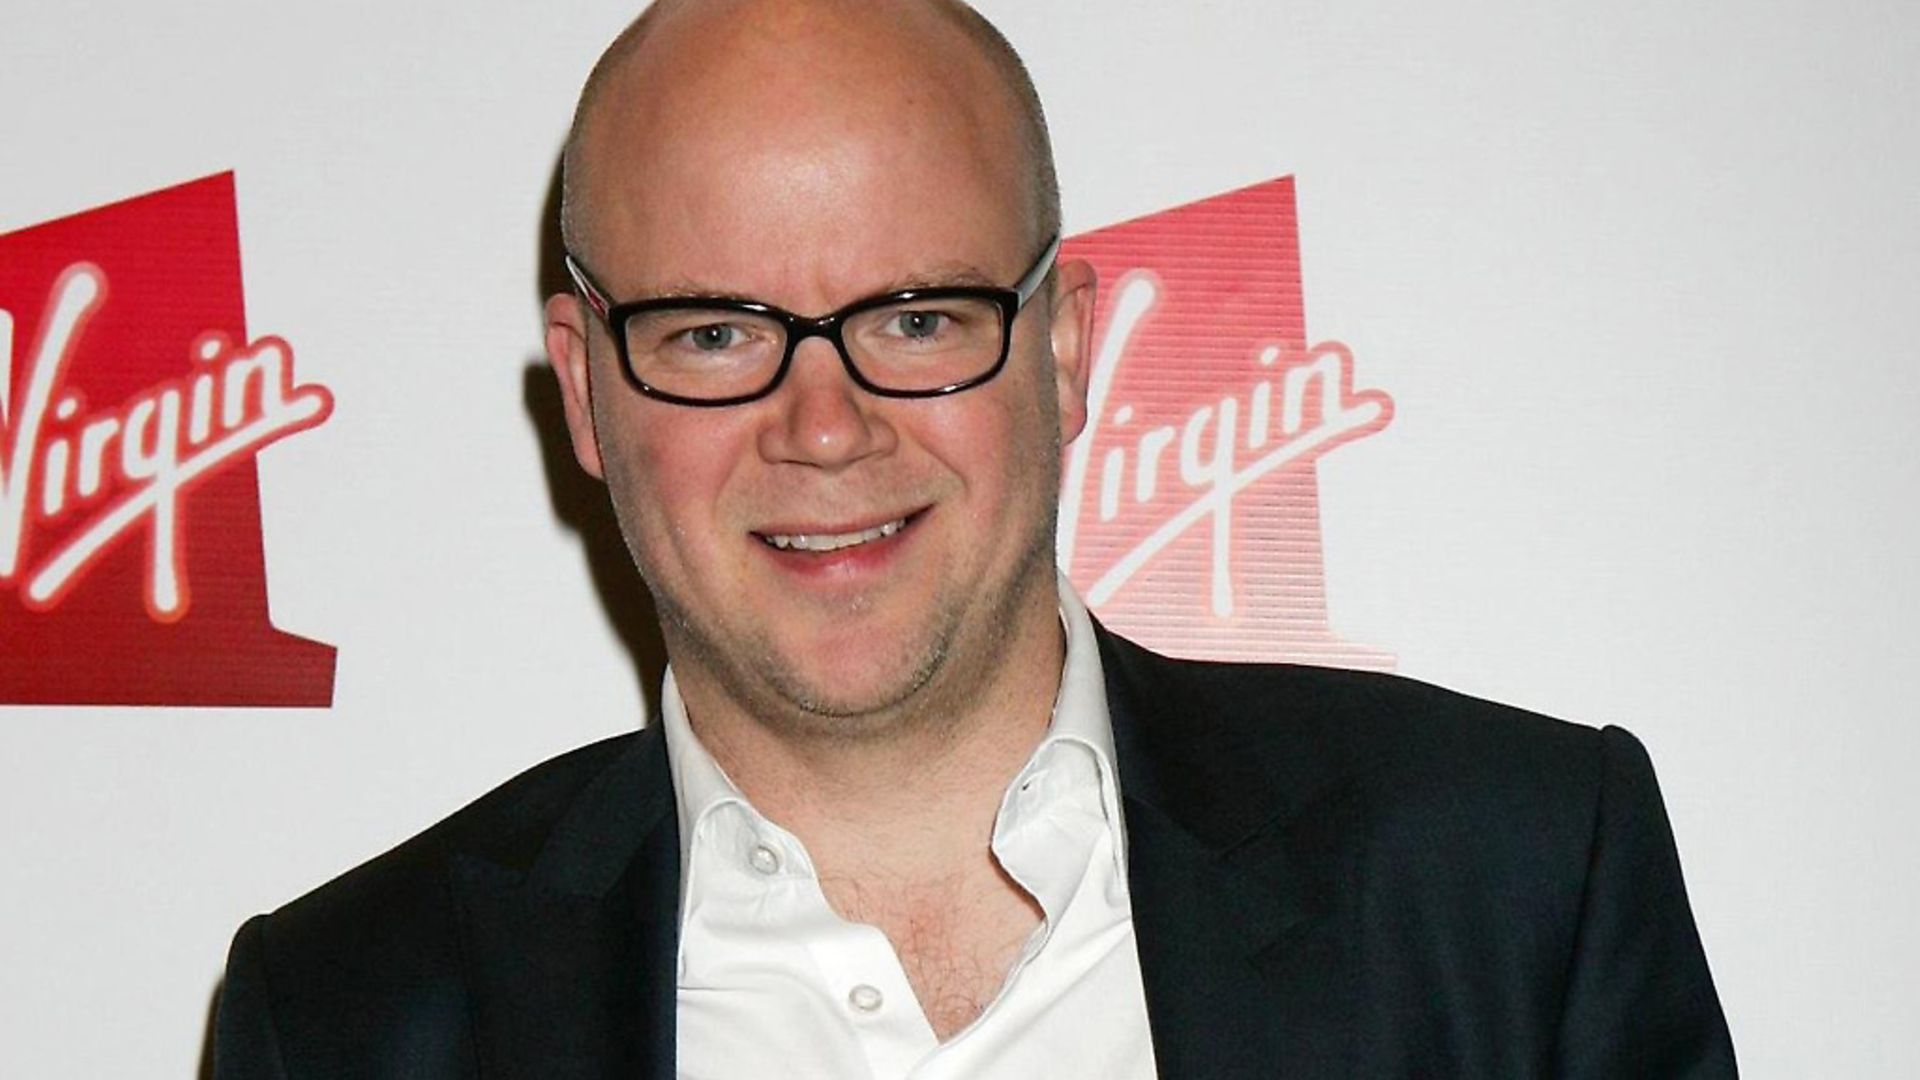 Toby Young attends The Virgin 1 Autumn/Winter lunch at Almada, Dover Street in central London. PHOTO: EMPICS Entertainment/Brian O'Sullivan. - Credit: EMPICS Entertainment